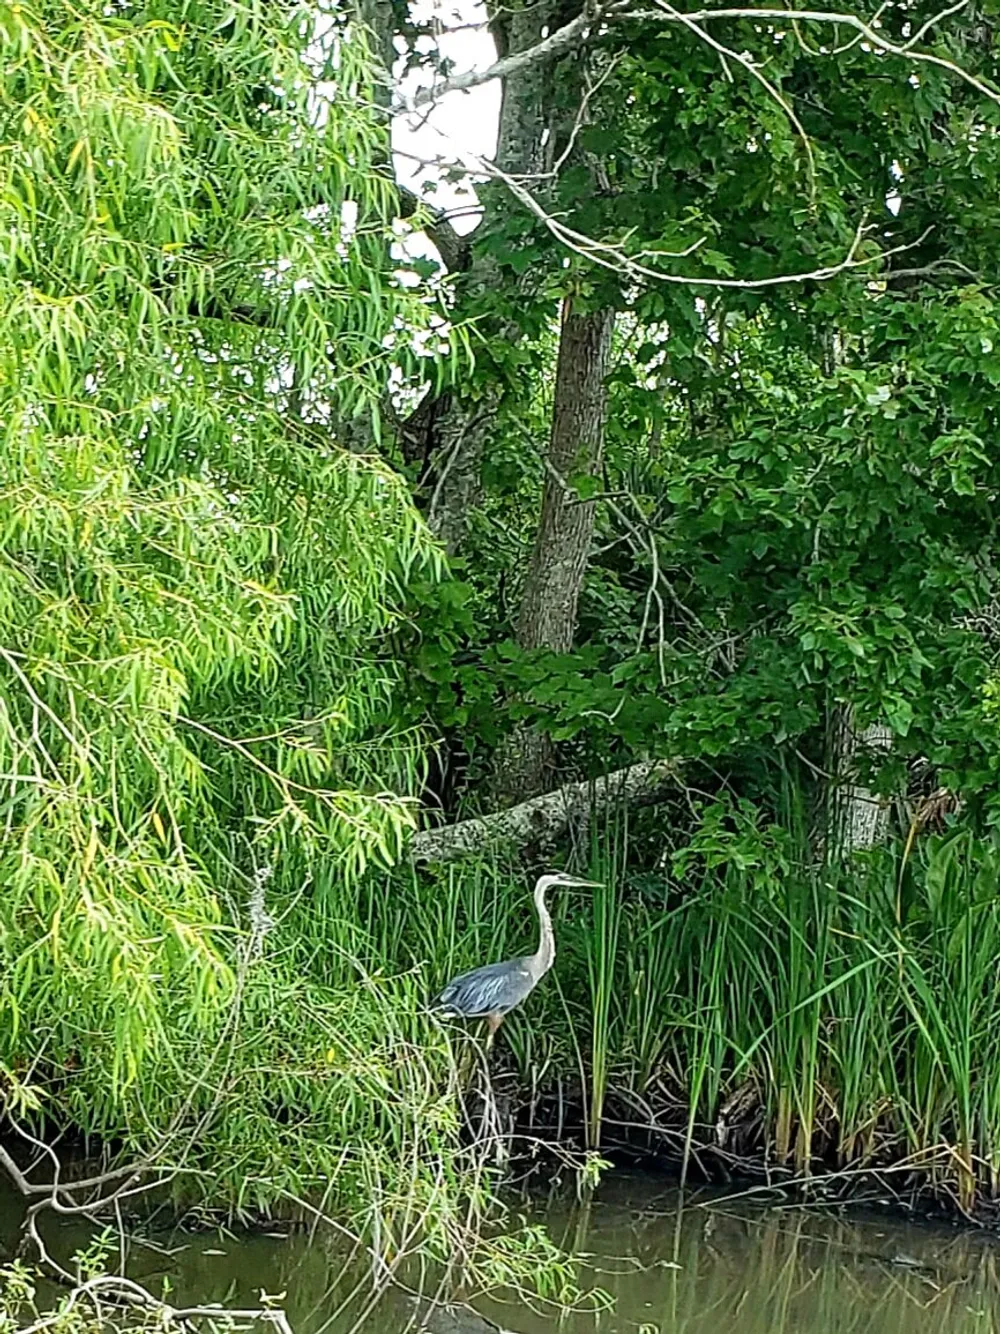 A heron stands gracefully at the waters edge amidst lush greenery and willow branches